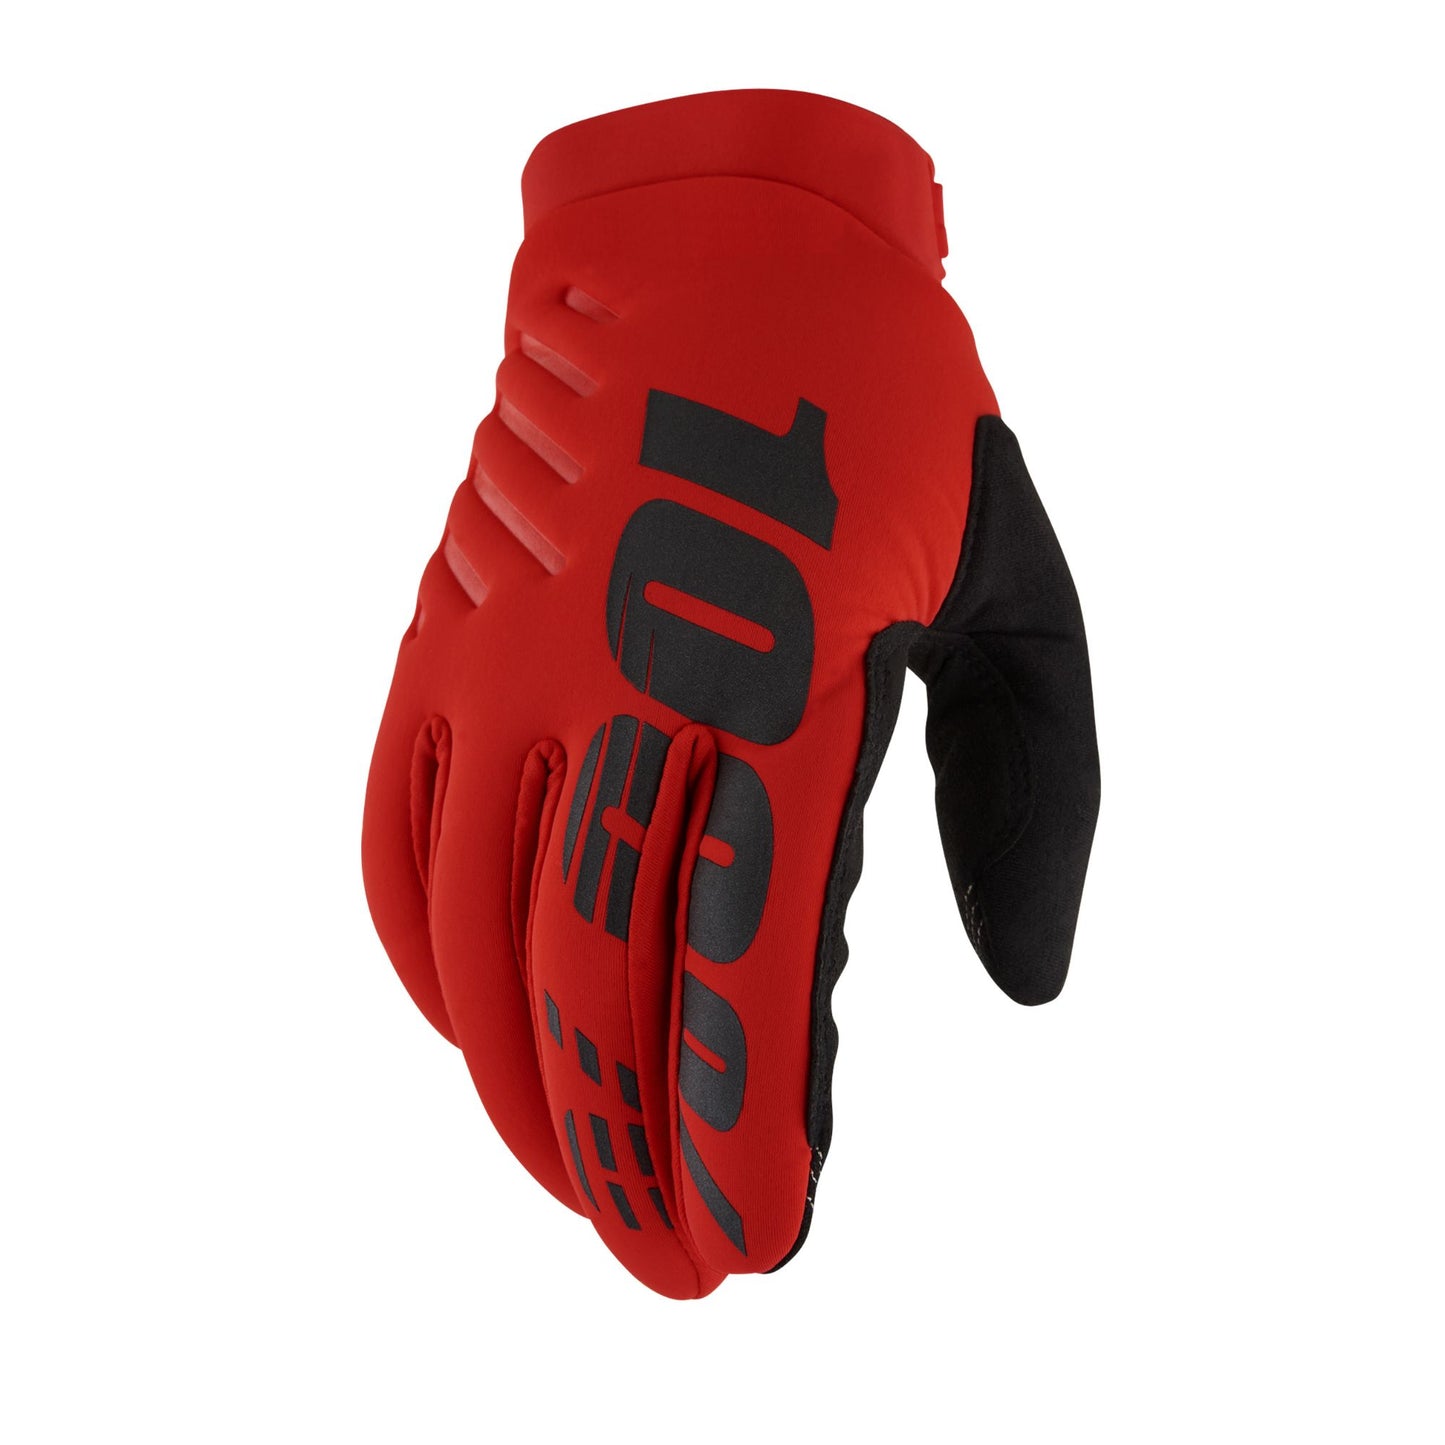 Men's Full Finger Cycling Gloves 100% Brisker AW22 Cold Weather Red X Large